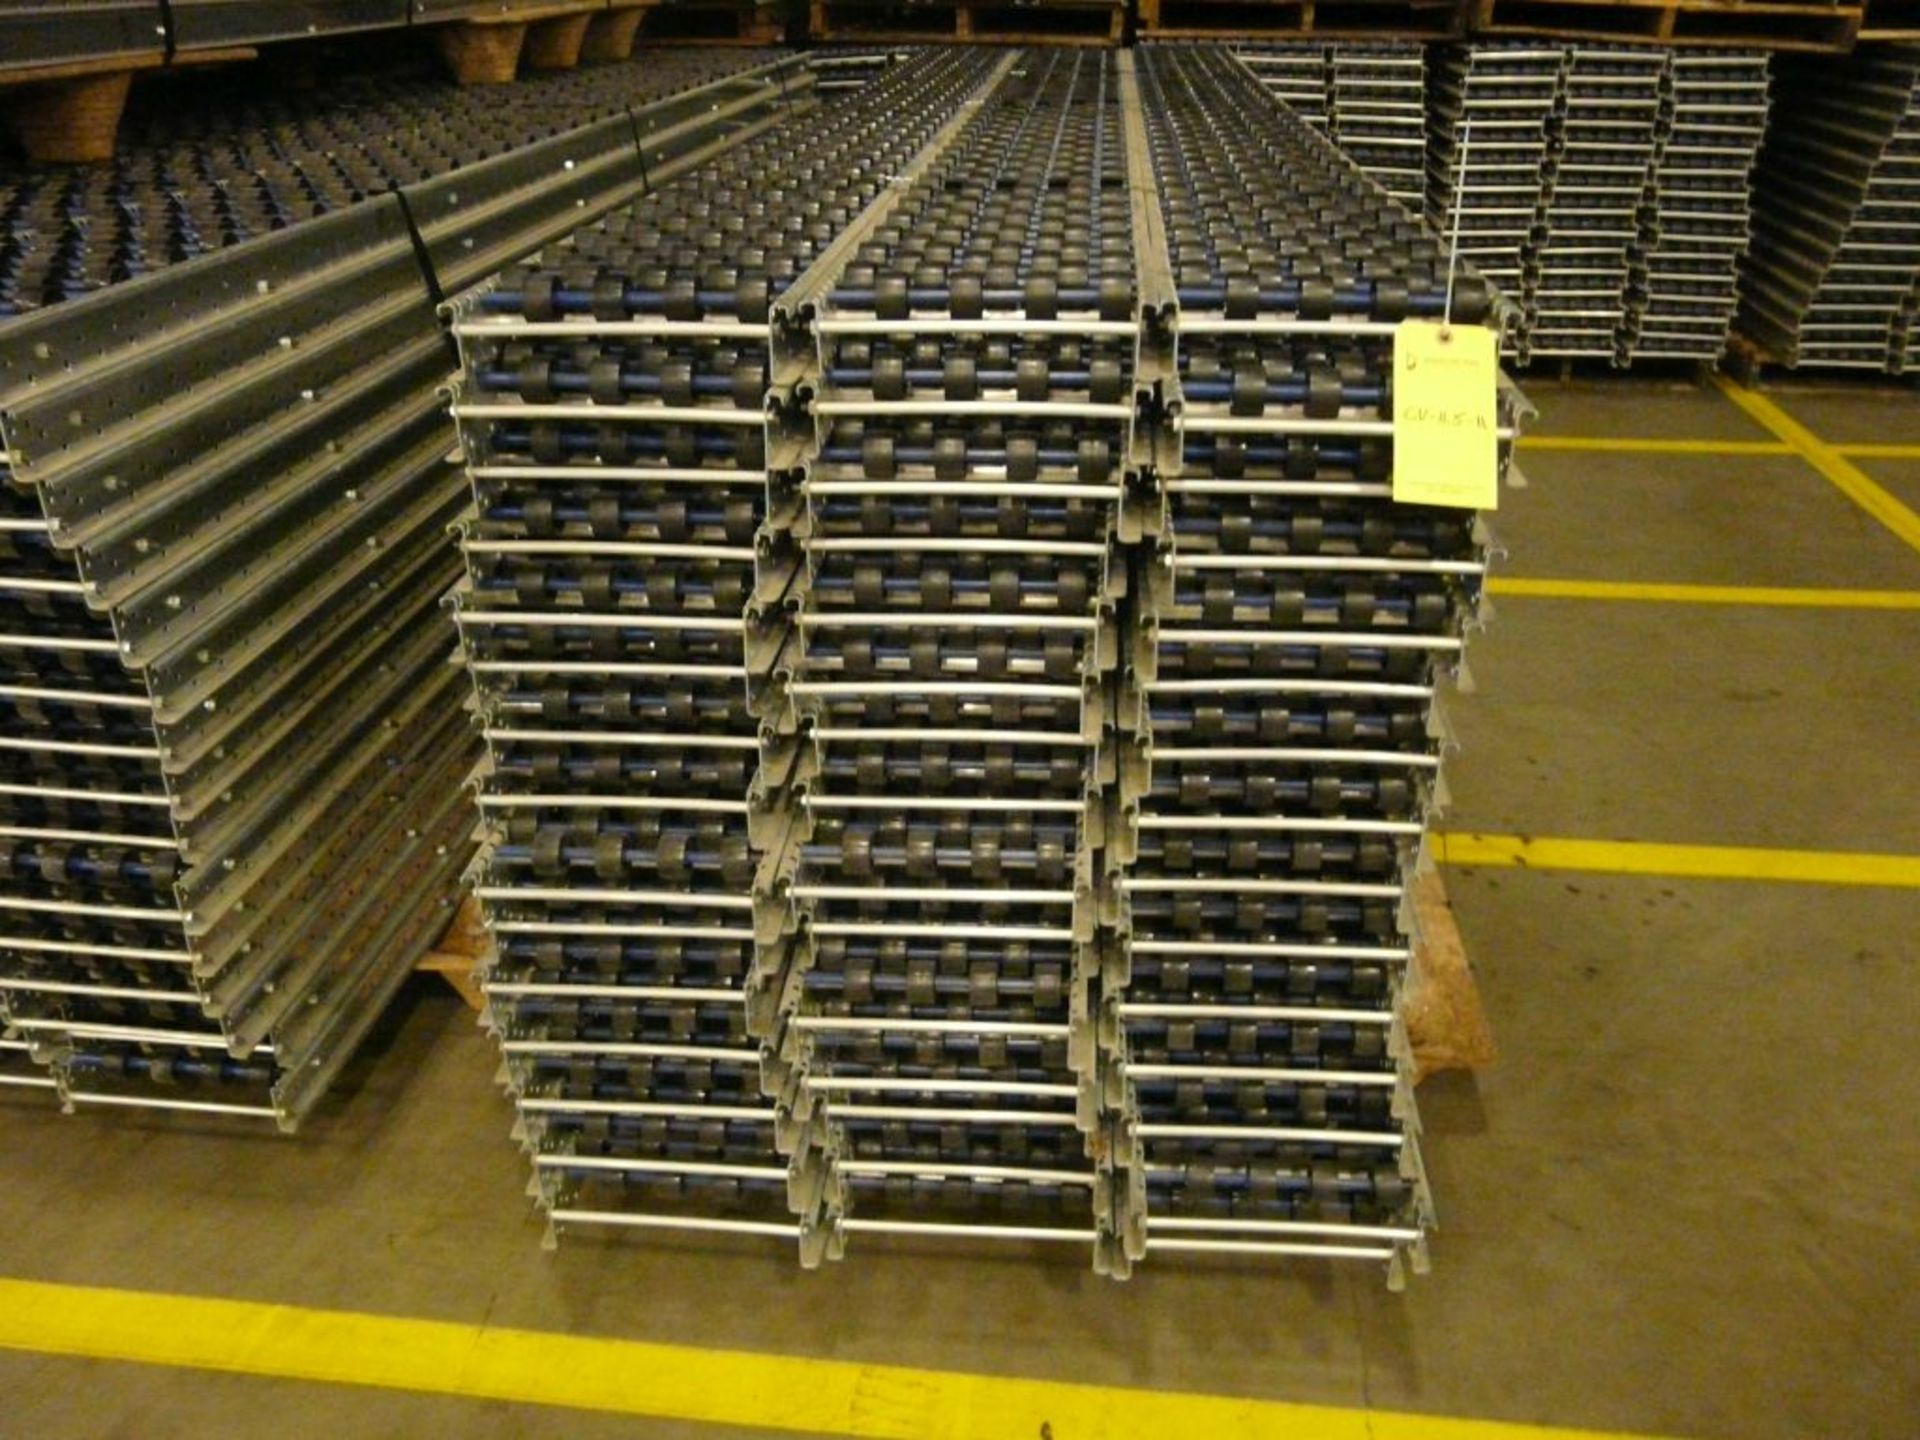 Lot of (90) SpanTrack Wheelbed Carton Flow Conveyors - 11.5'L x 11"W; Tag: 223551 - $30 Lot - Image 2 of 4